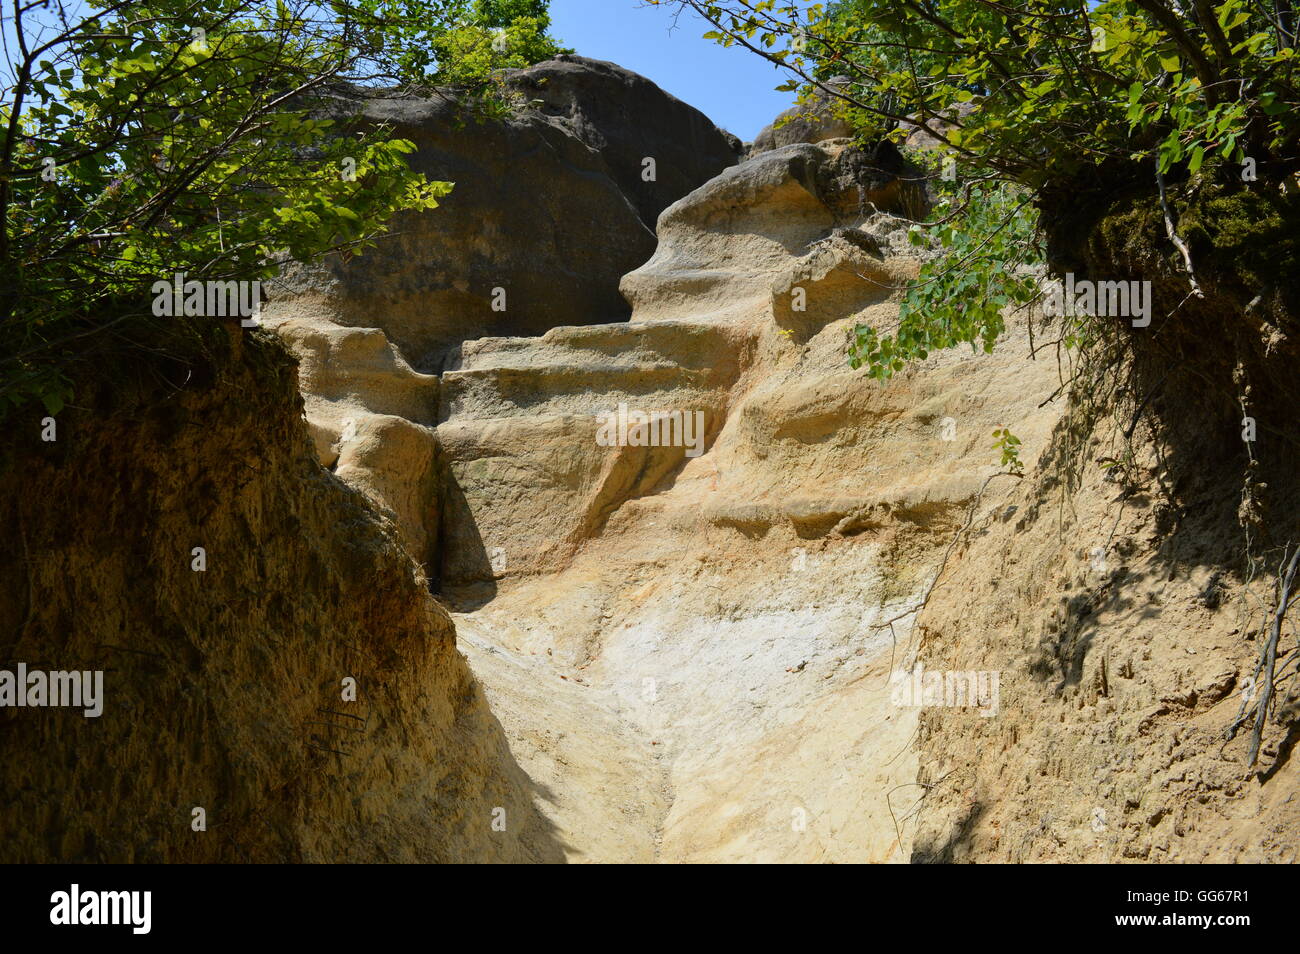 Geological reservation - Dragons' garden Stock Photo